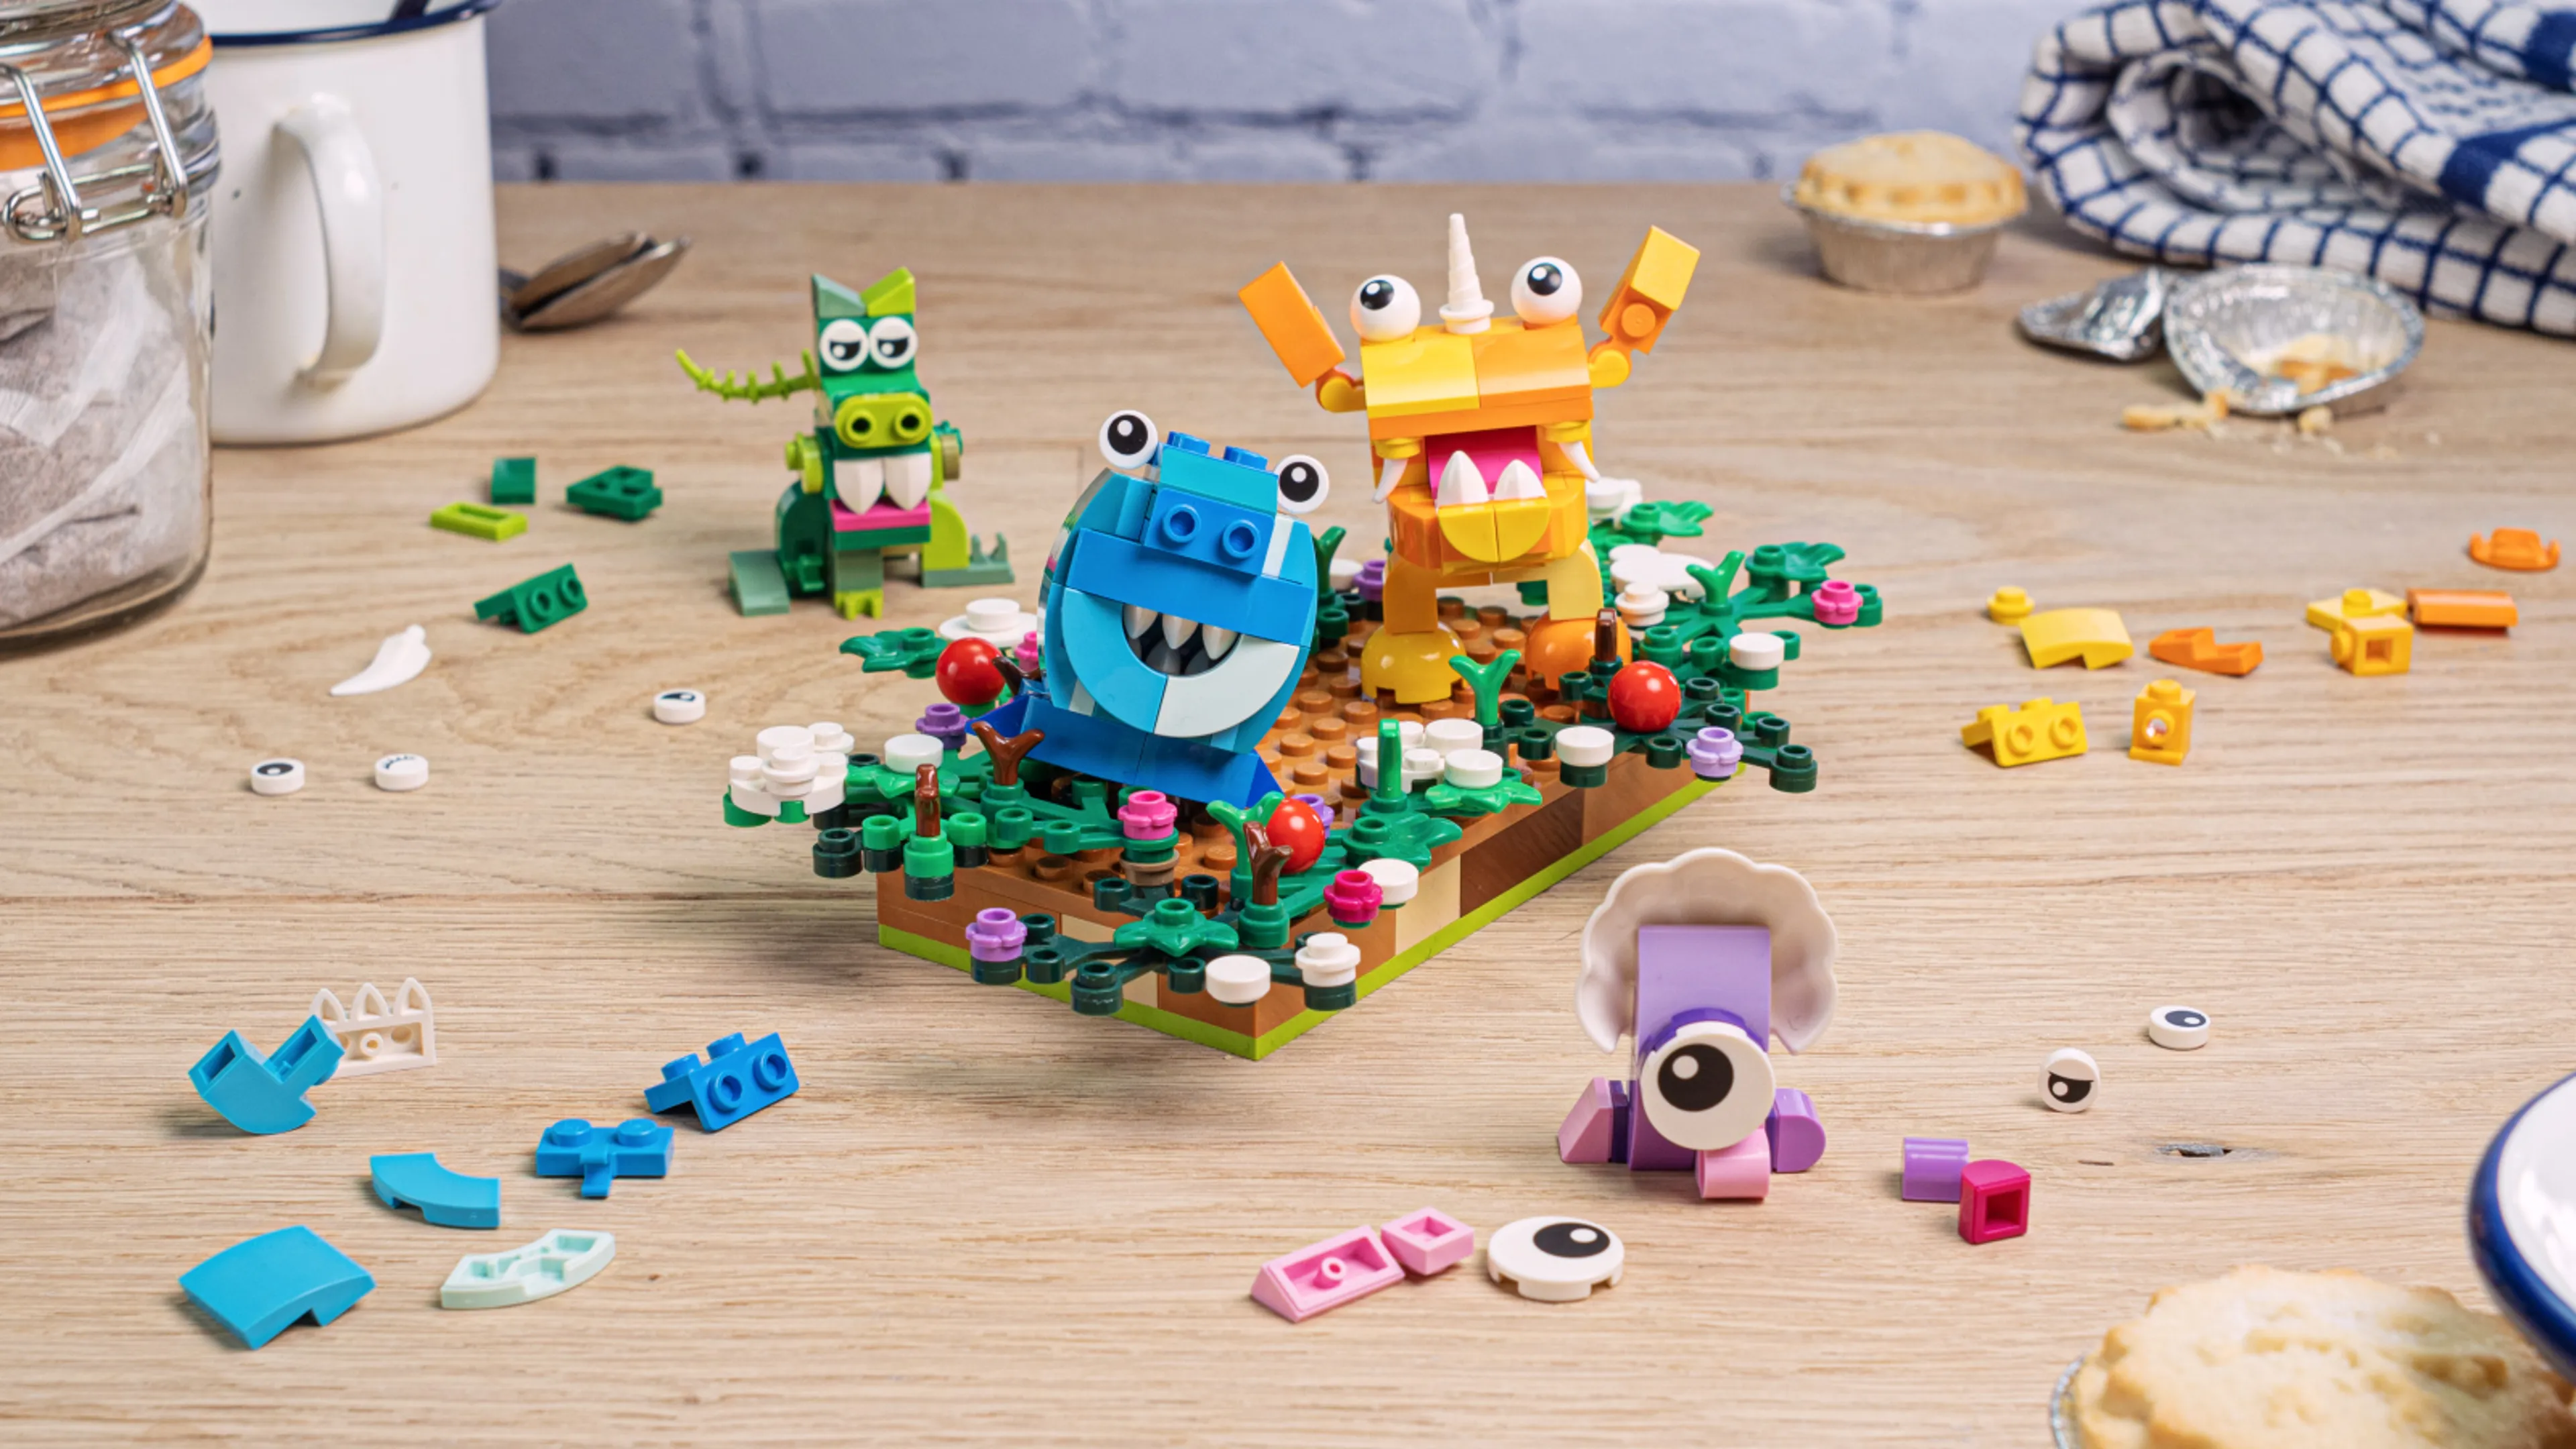 LEGO monsters on a baseplate